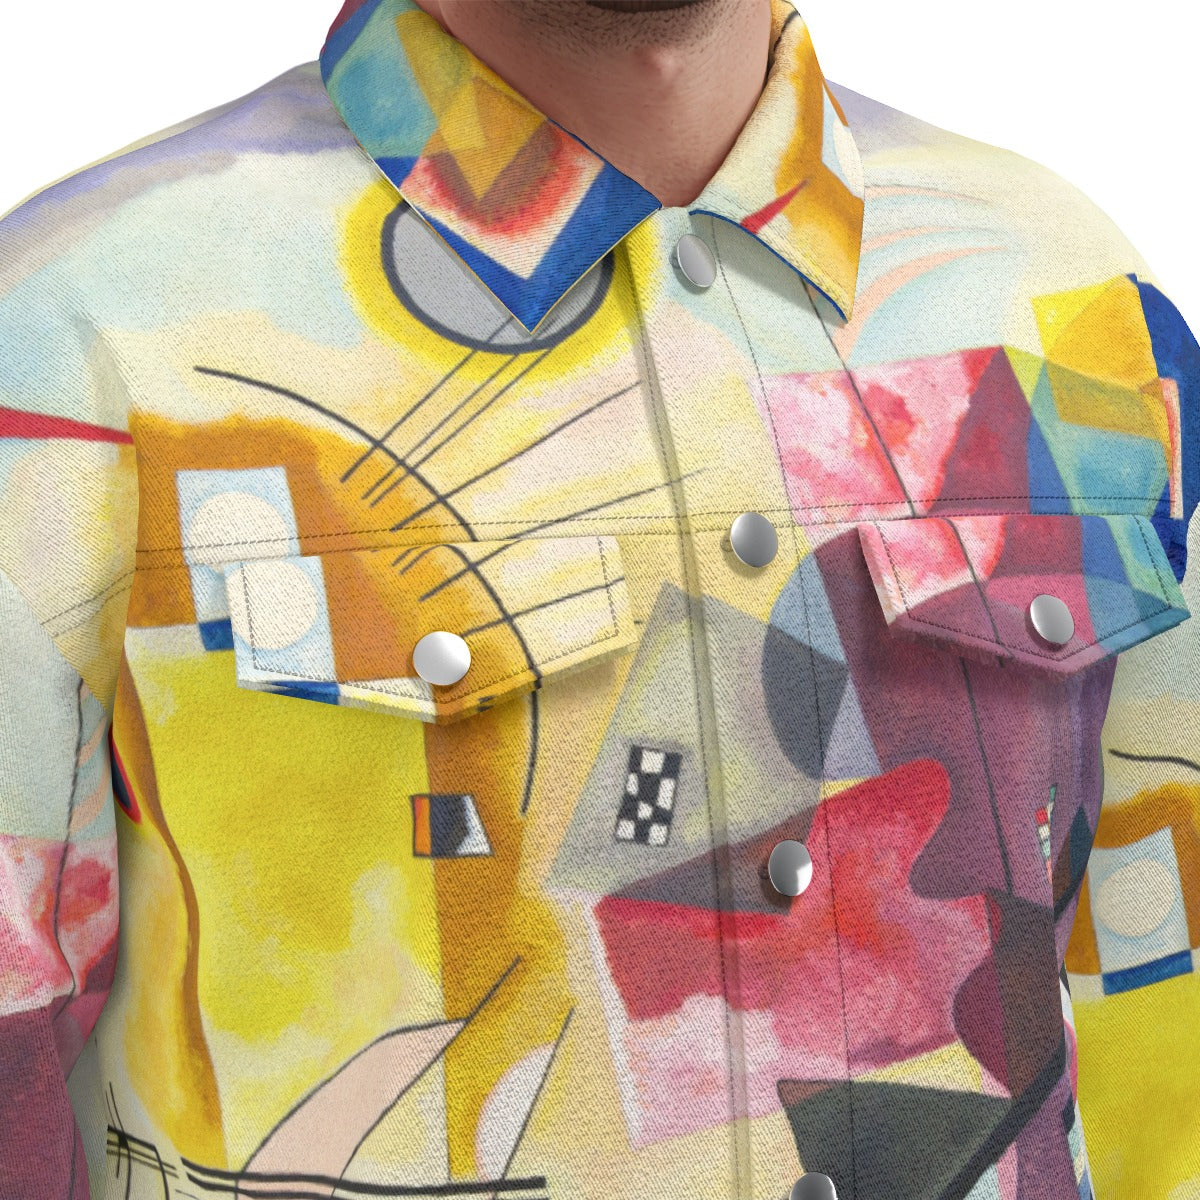 Colorful lapel jacket with abstract design